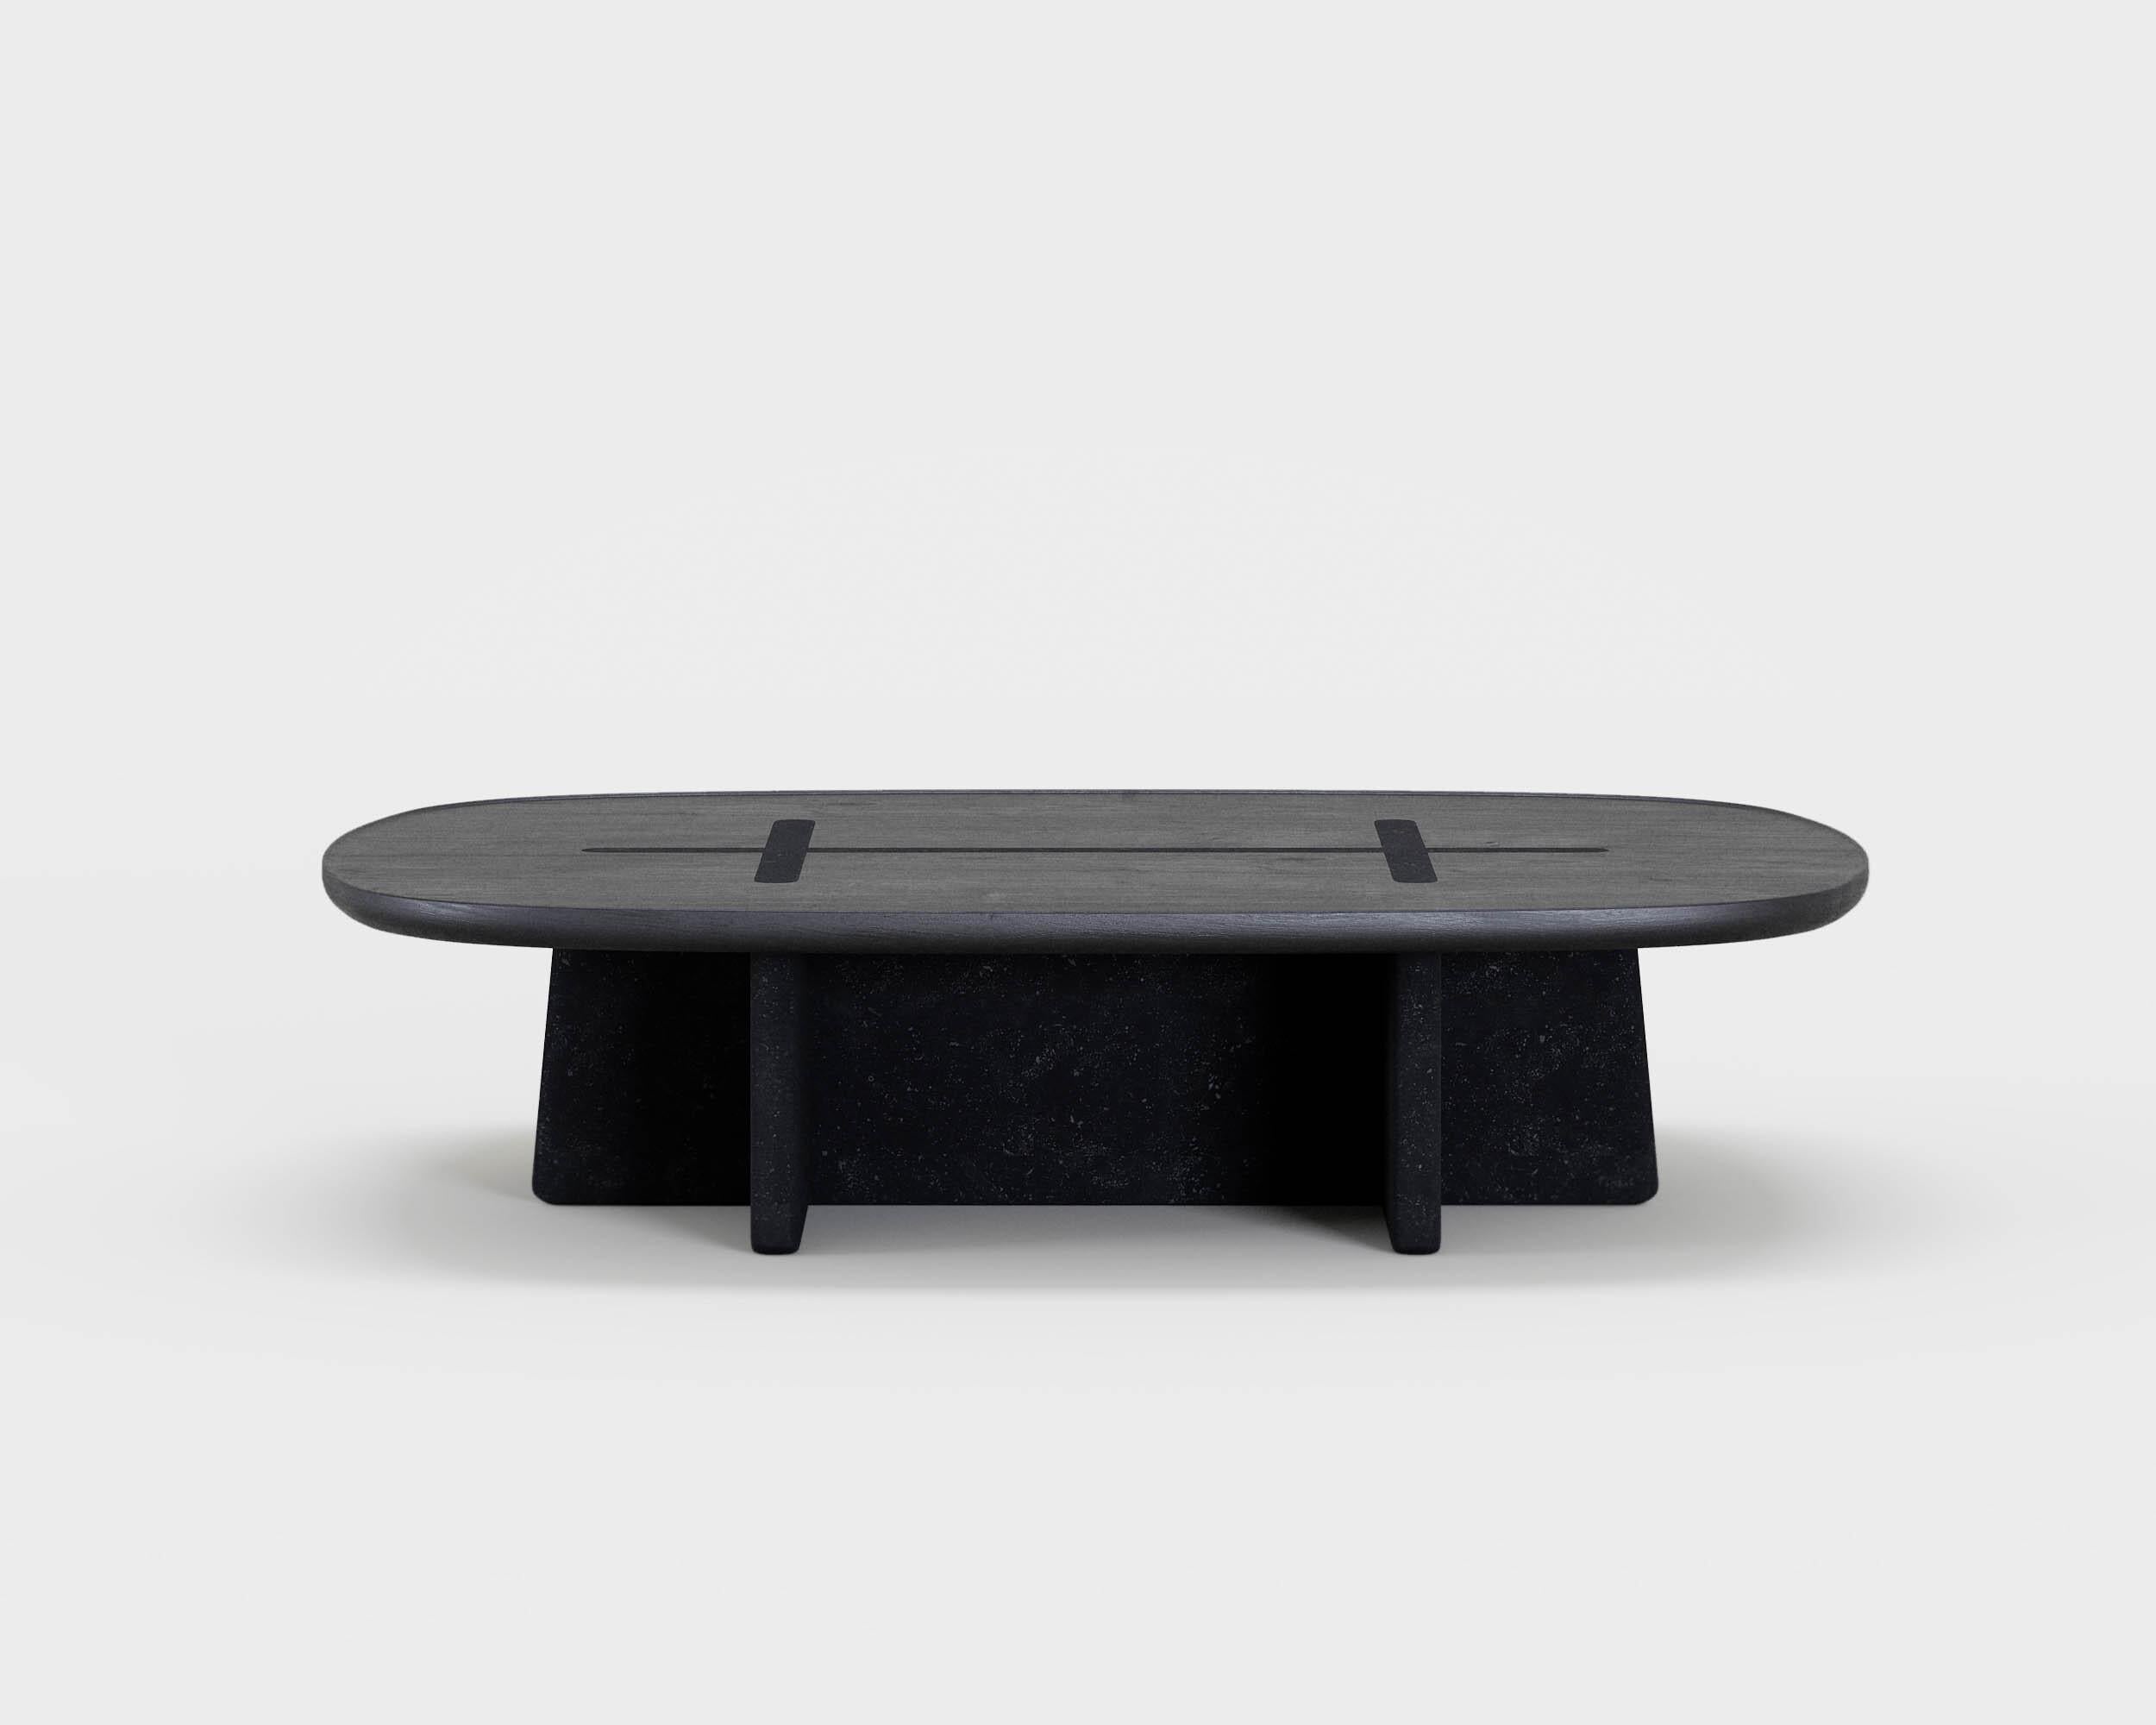 'Bleecker Street' Coffee Table by Man of Parts
Signed by Sebastian Herkner 

Solid oak wood table top available in shades: 
- Black 
- Mist
- Ivory
- Nude 
- Whiskey

Stone base available in shades: 
- French sandstone
- Belgian blue limestone